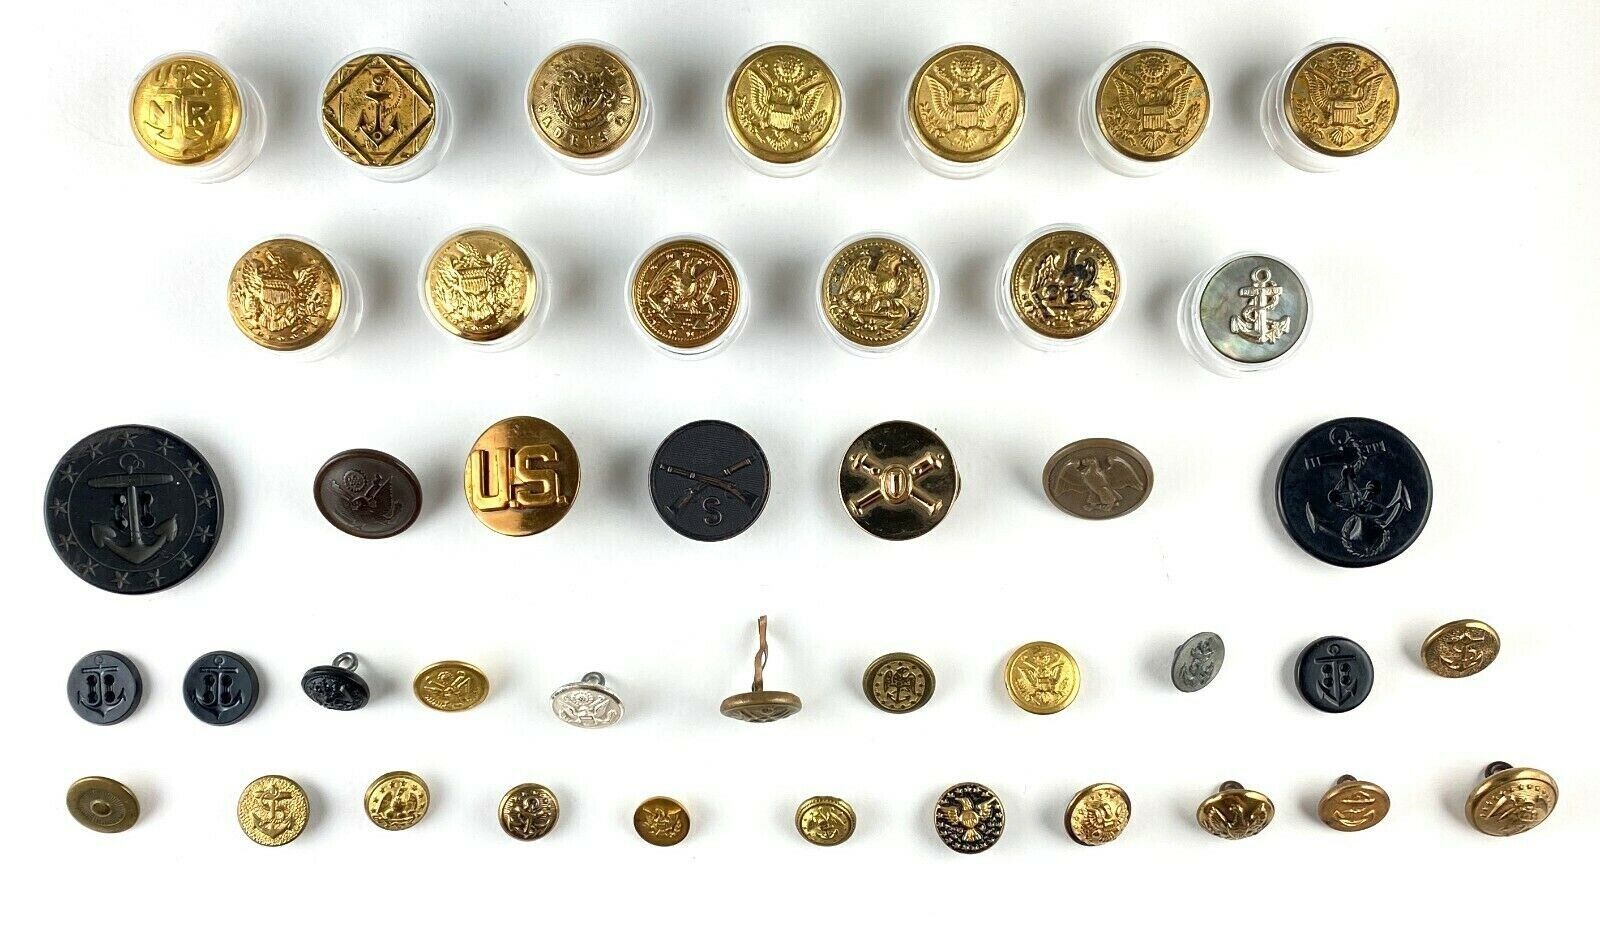 Antique Brass / Other Materials U.S. Military Buttons - Lot of 41